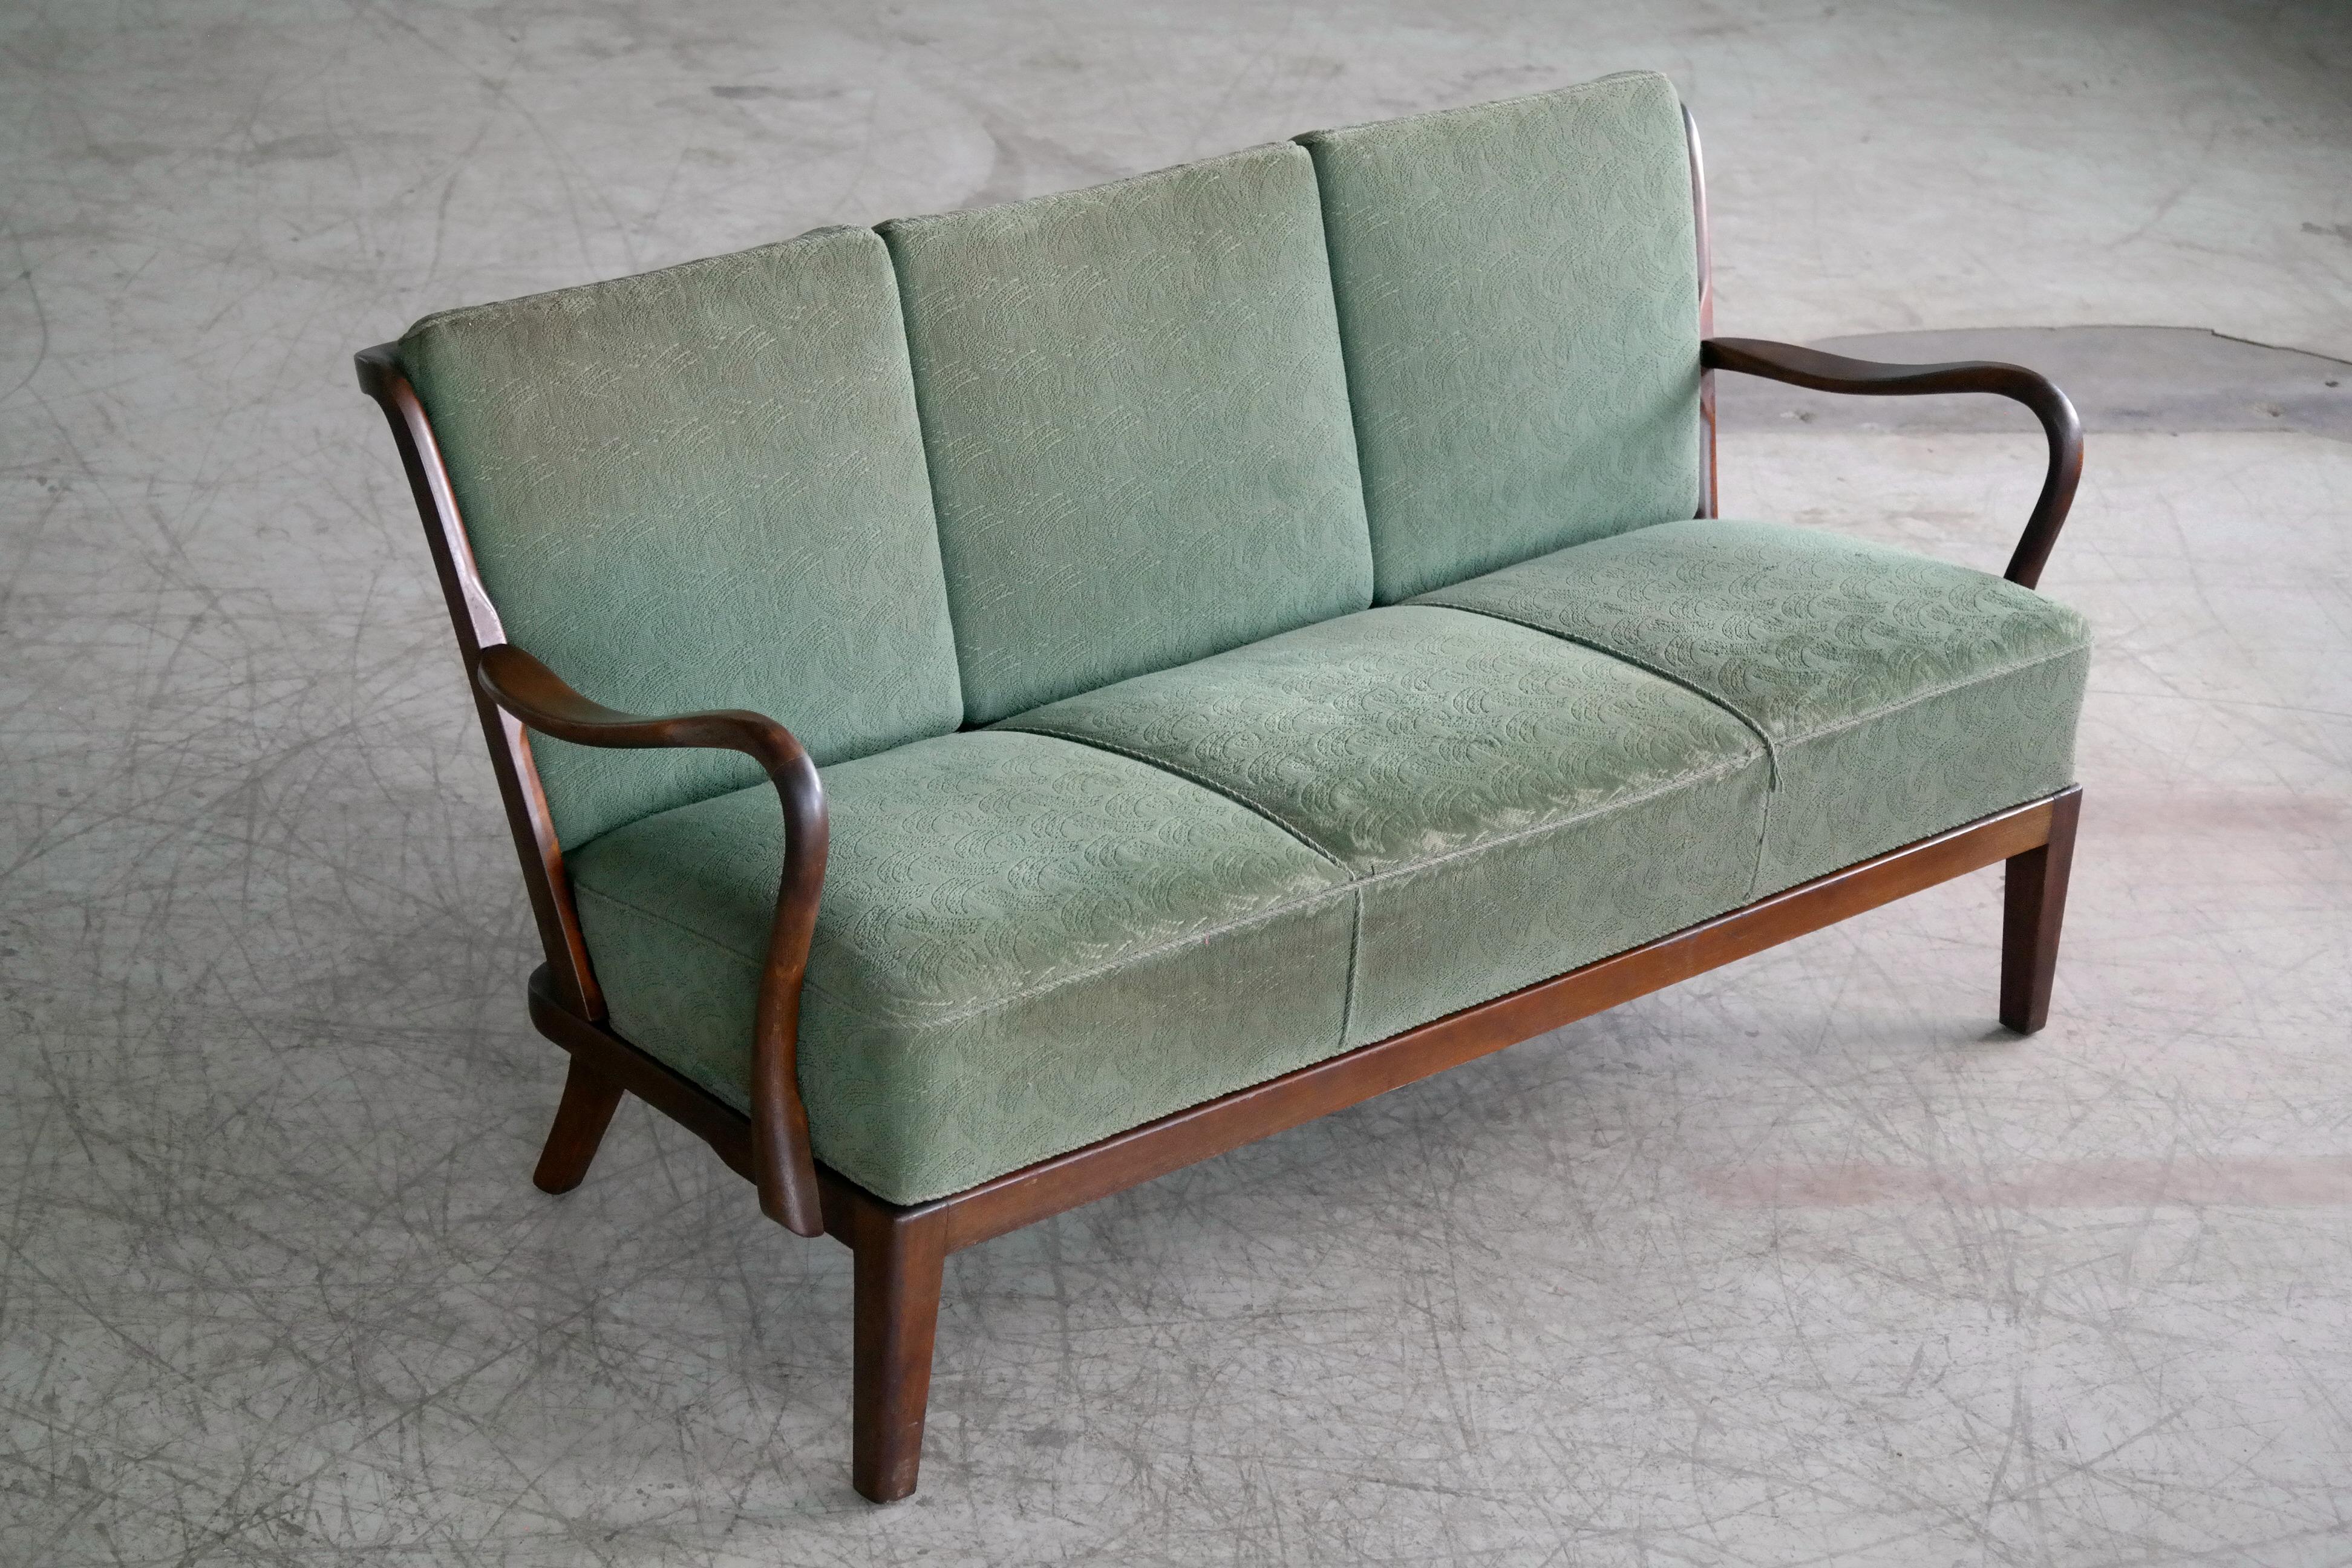 Sought after three-seat open arm sofa in beech and wool manufactured in Denmark in the 1940s by Slagelse Mobelvaerk as Model 95. The frame is in very good original condition with the stained and varnished beech wood showing some appropriate wear and